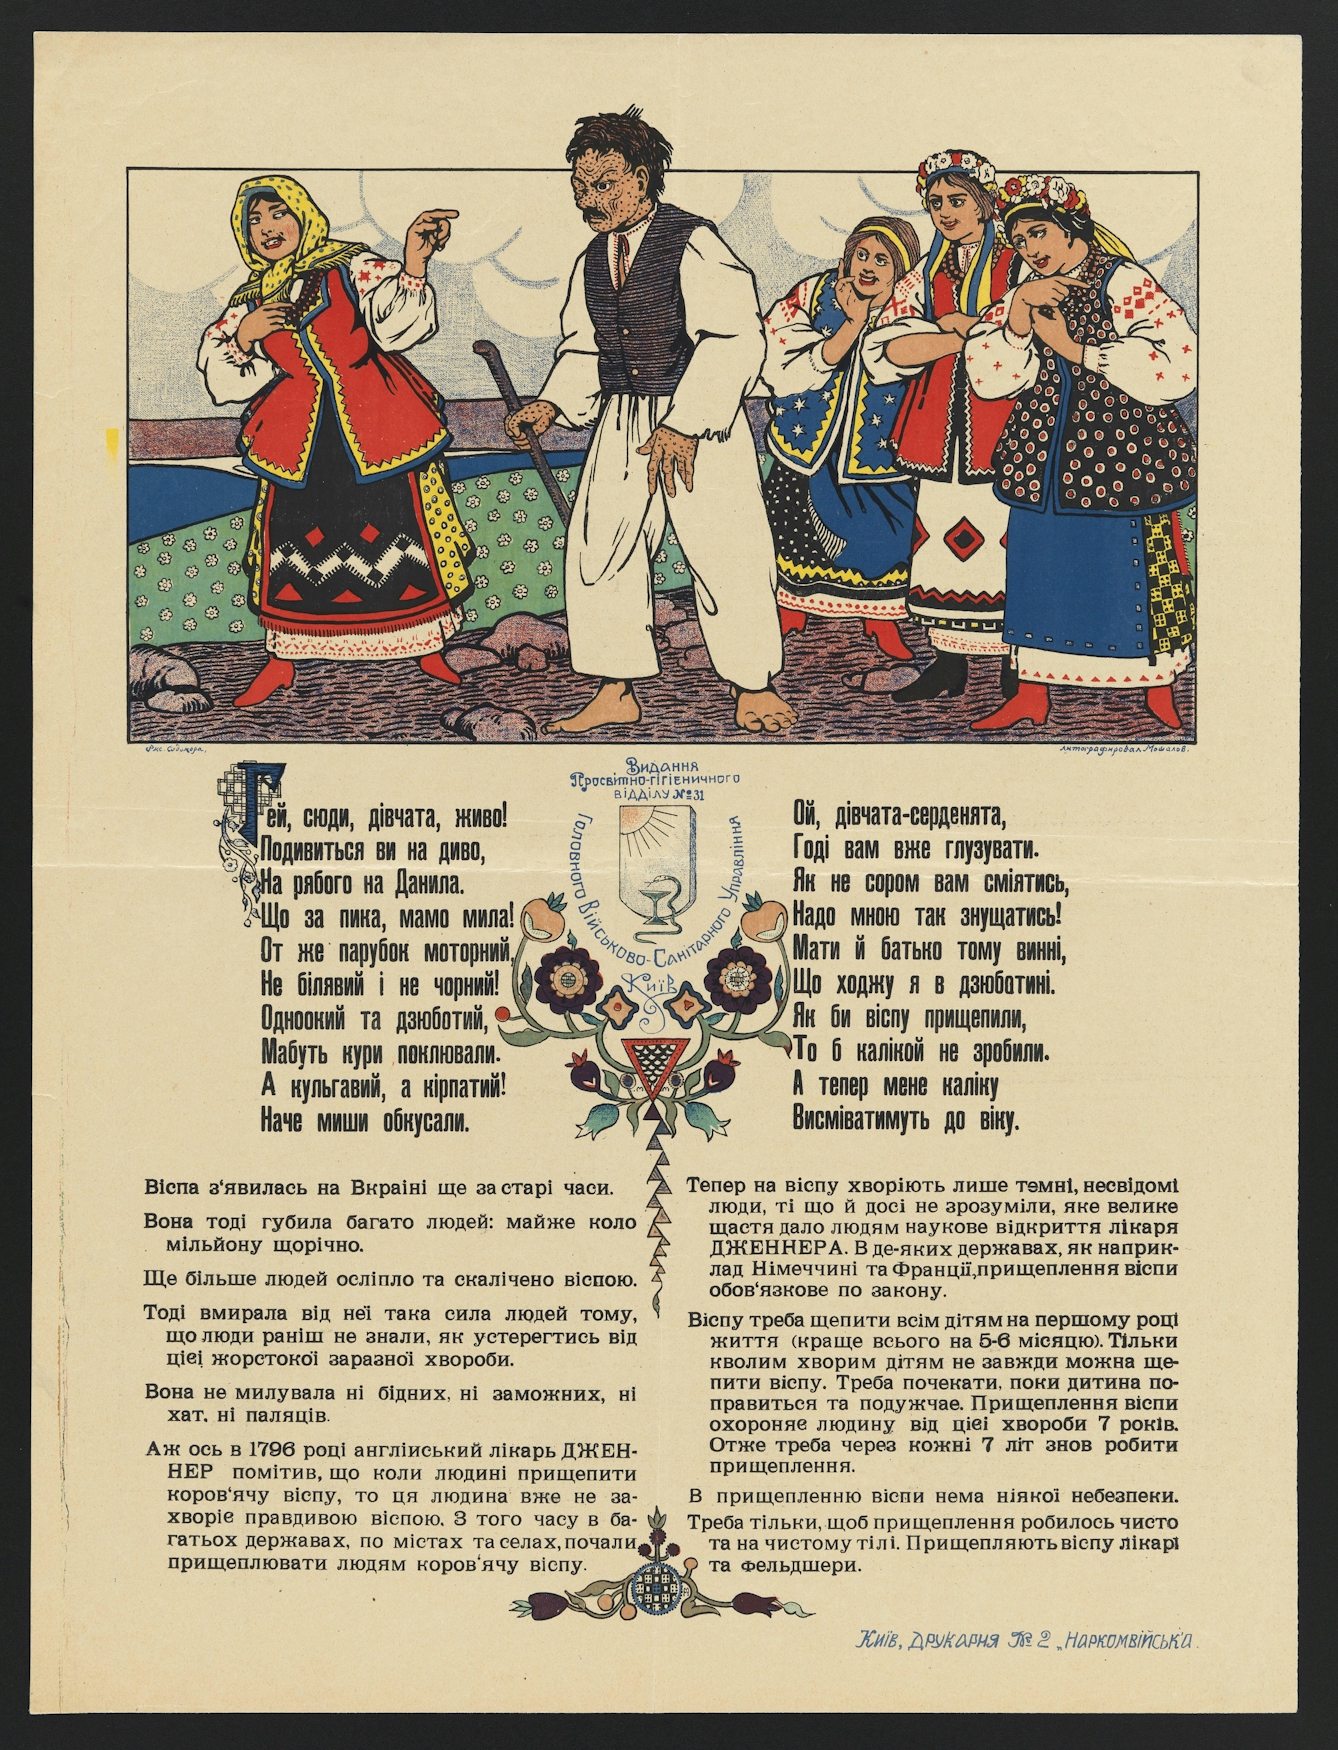 Poster showing young women in the Ukraine teasing a boy who is pockmarked and blinded in one eye by smallpox.  A young woman (left) summons three middle-class young women in brightly-coloured costumes (right) to look at a boy who has been disfigured and partially blinded by the effects of smallpox. She says "Look at Daniel! He has a remarkable face, not beautiful! He looks as if hands have torn pieces out of his face, or as if a mouse has bitten holes in it." He replies: "Shame on you, girls, to laugh at me like that! If you want to know the truth, my father and mother are responsible for my singular appearance. If they had vaccinated me, I would not now look so unpleasant, but as it is I'm doomed to be like a scarecrow with everybody laughing at me"